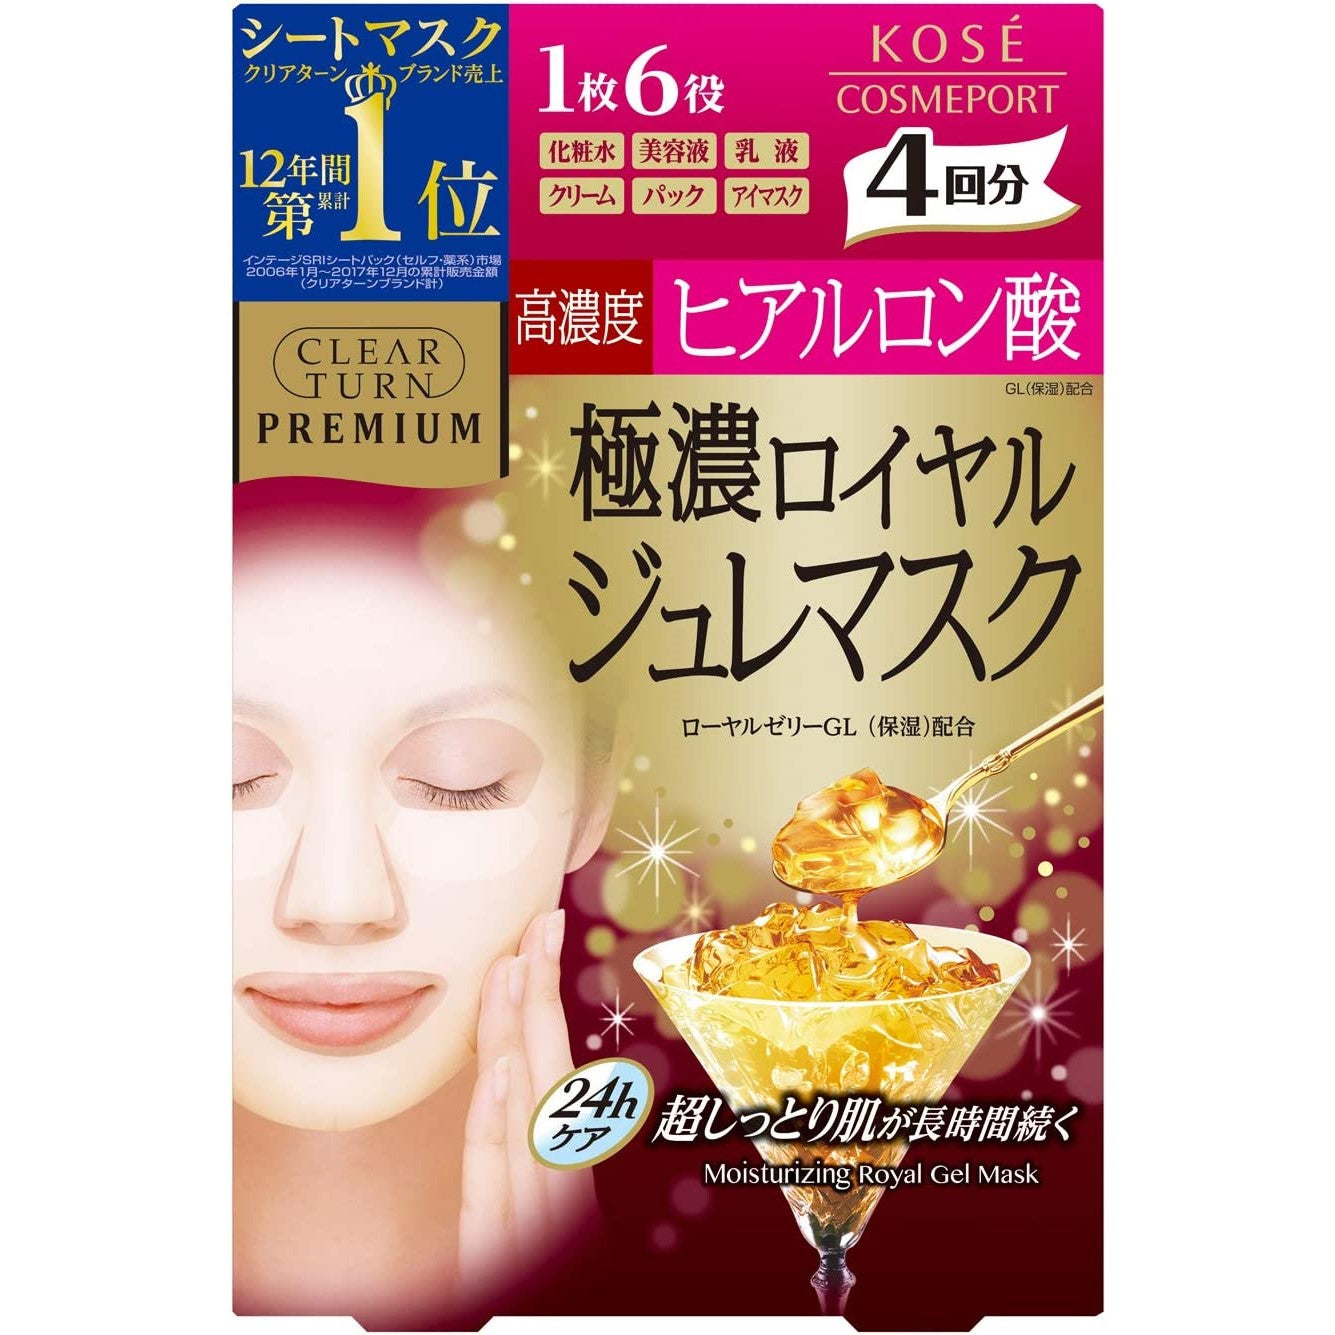 Kose Clear Turn Premium Royal Jelly Mask Hyaluronic Acid 4pcs (Made in Japan)